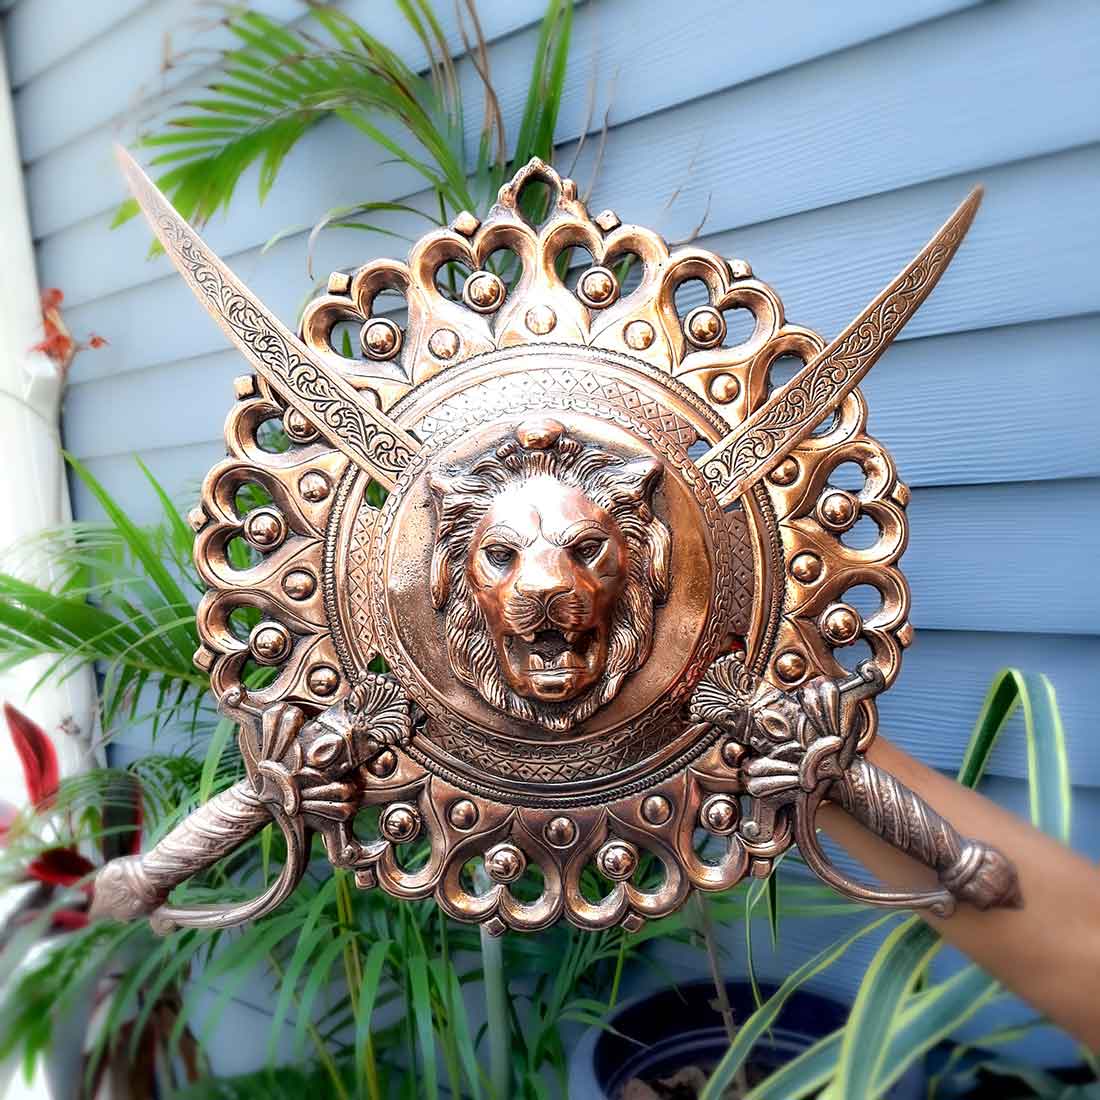 Dhal Talwar Showpiece - Lion Design - For Wall Decor - 18 Inch - Apkamart - #Style_pack of 2